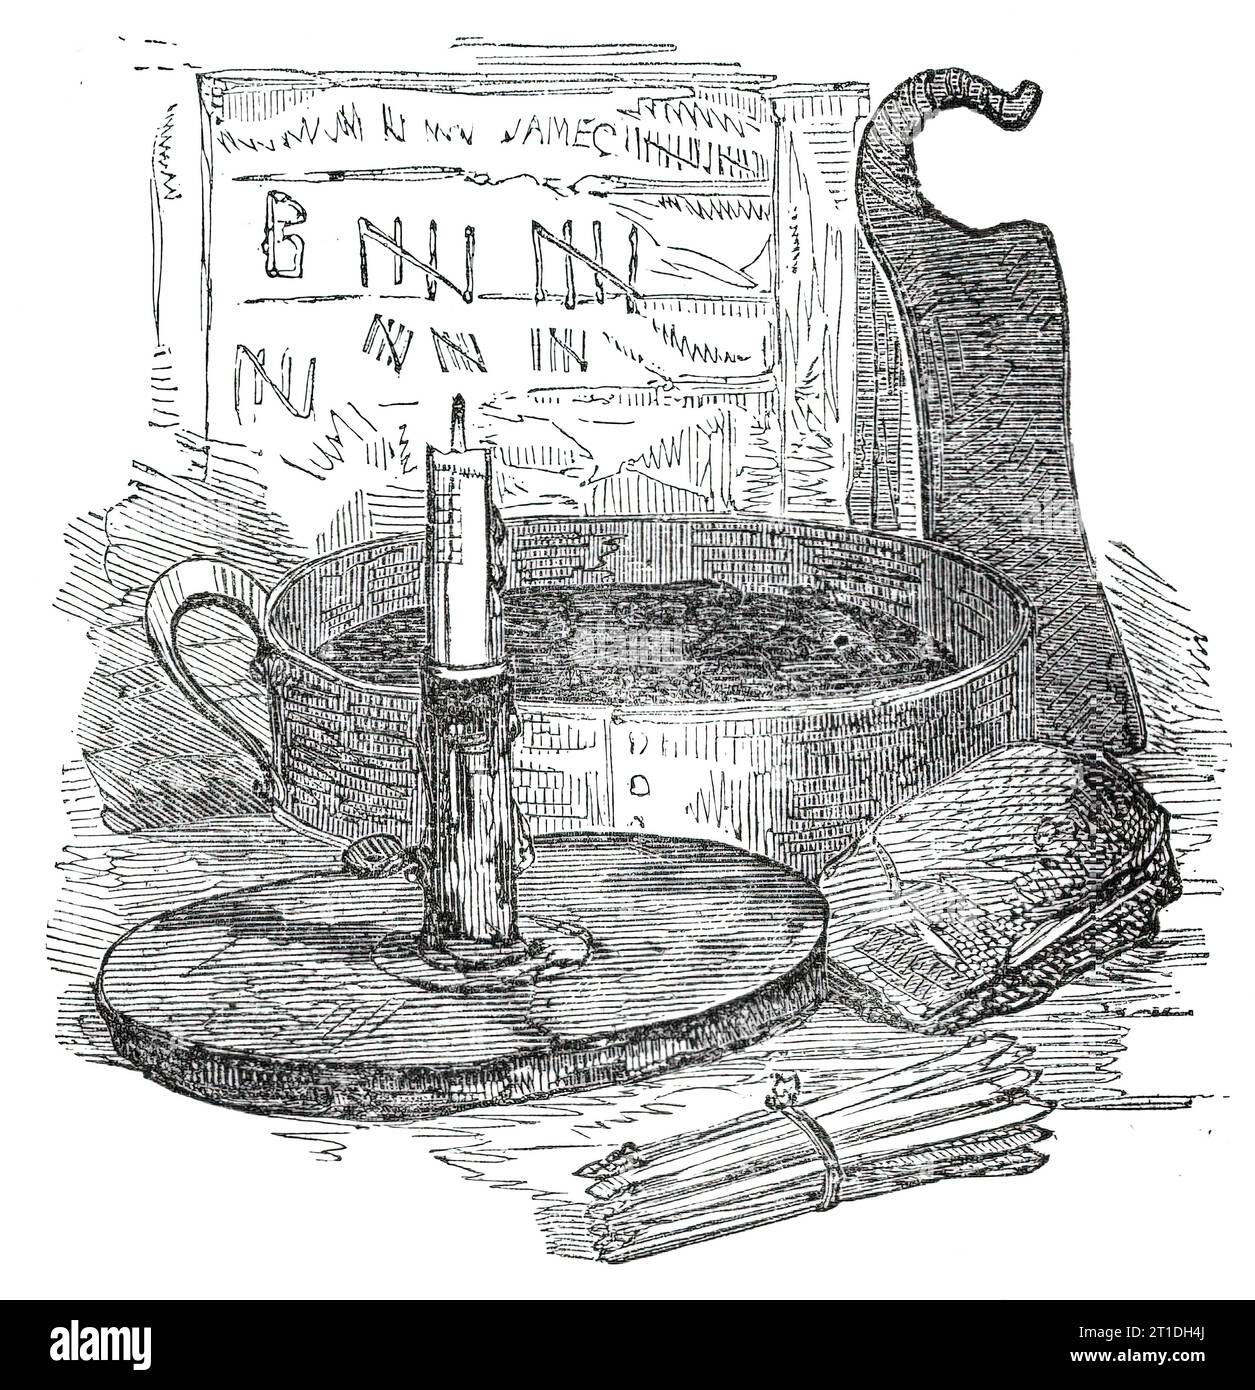 The tinder-box with its et ceteras, 1860. 'The brimstone-matches, the tinder-box, and the flint and steel...are now amongst the matters of the past, and so completely have the lucifers superseded them that the fire-producing apparatus which was, and had been for centuries, so common in every dwelling throughout the land, are almost as rare as the schoolboy's &quot;Hornbook&quot;...Great as are the advantages which have arisen from the introduction of lucifer-matches, it is not altogether without some evils. In the large manufactories in which they are made the children and other workers are of Stock Photo